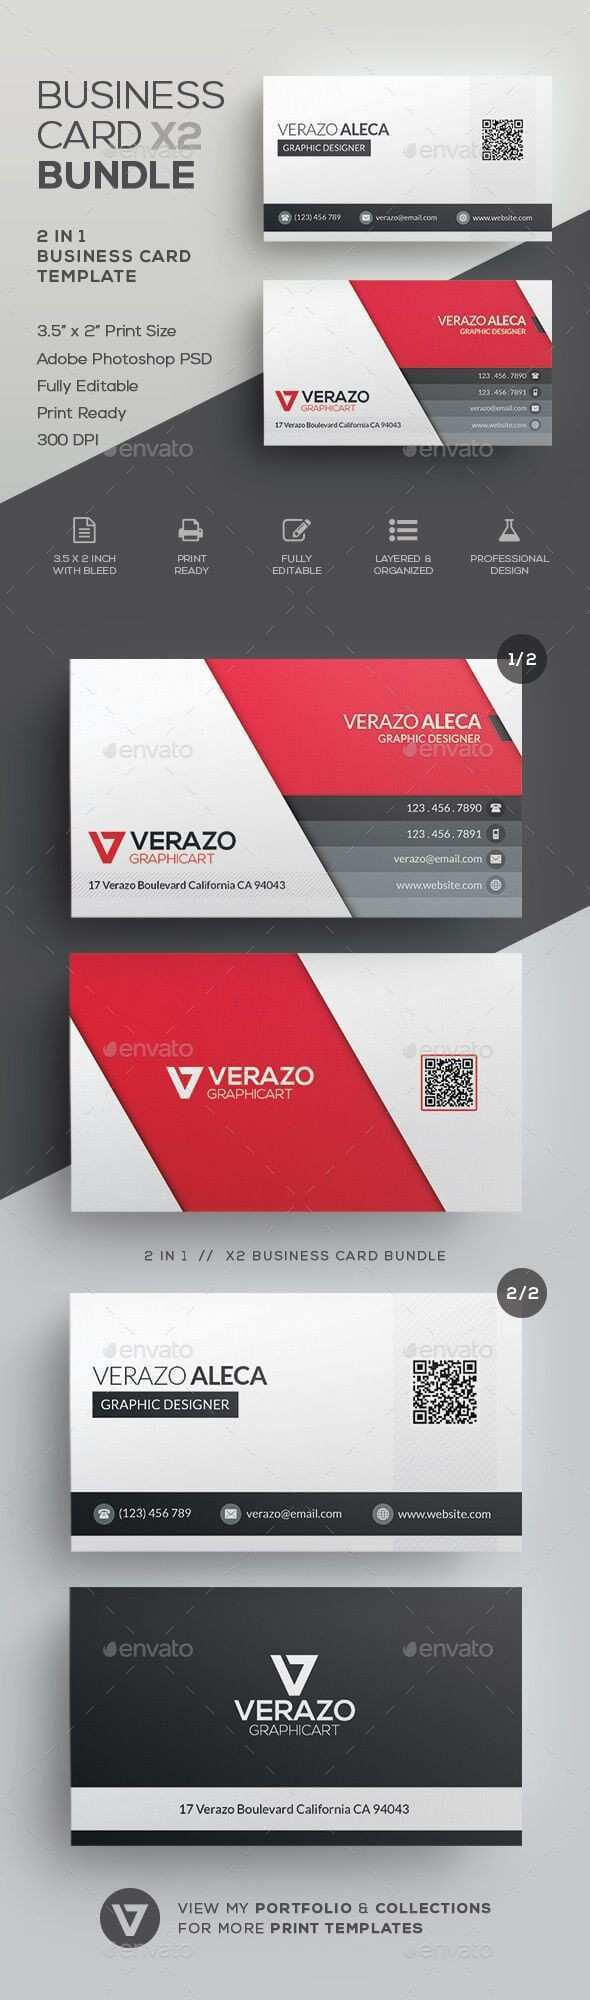 Download Ibm Business Card Template Free – Cards Design For Ibm Business Card Template